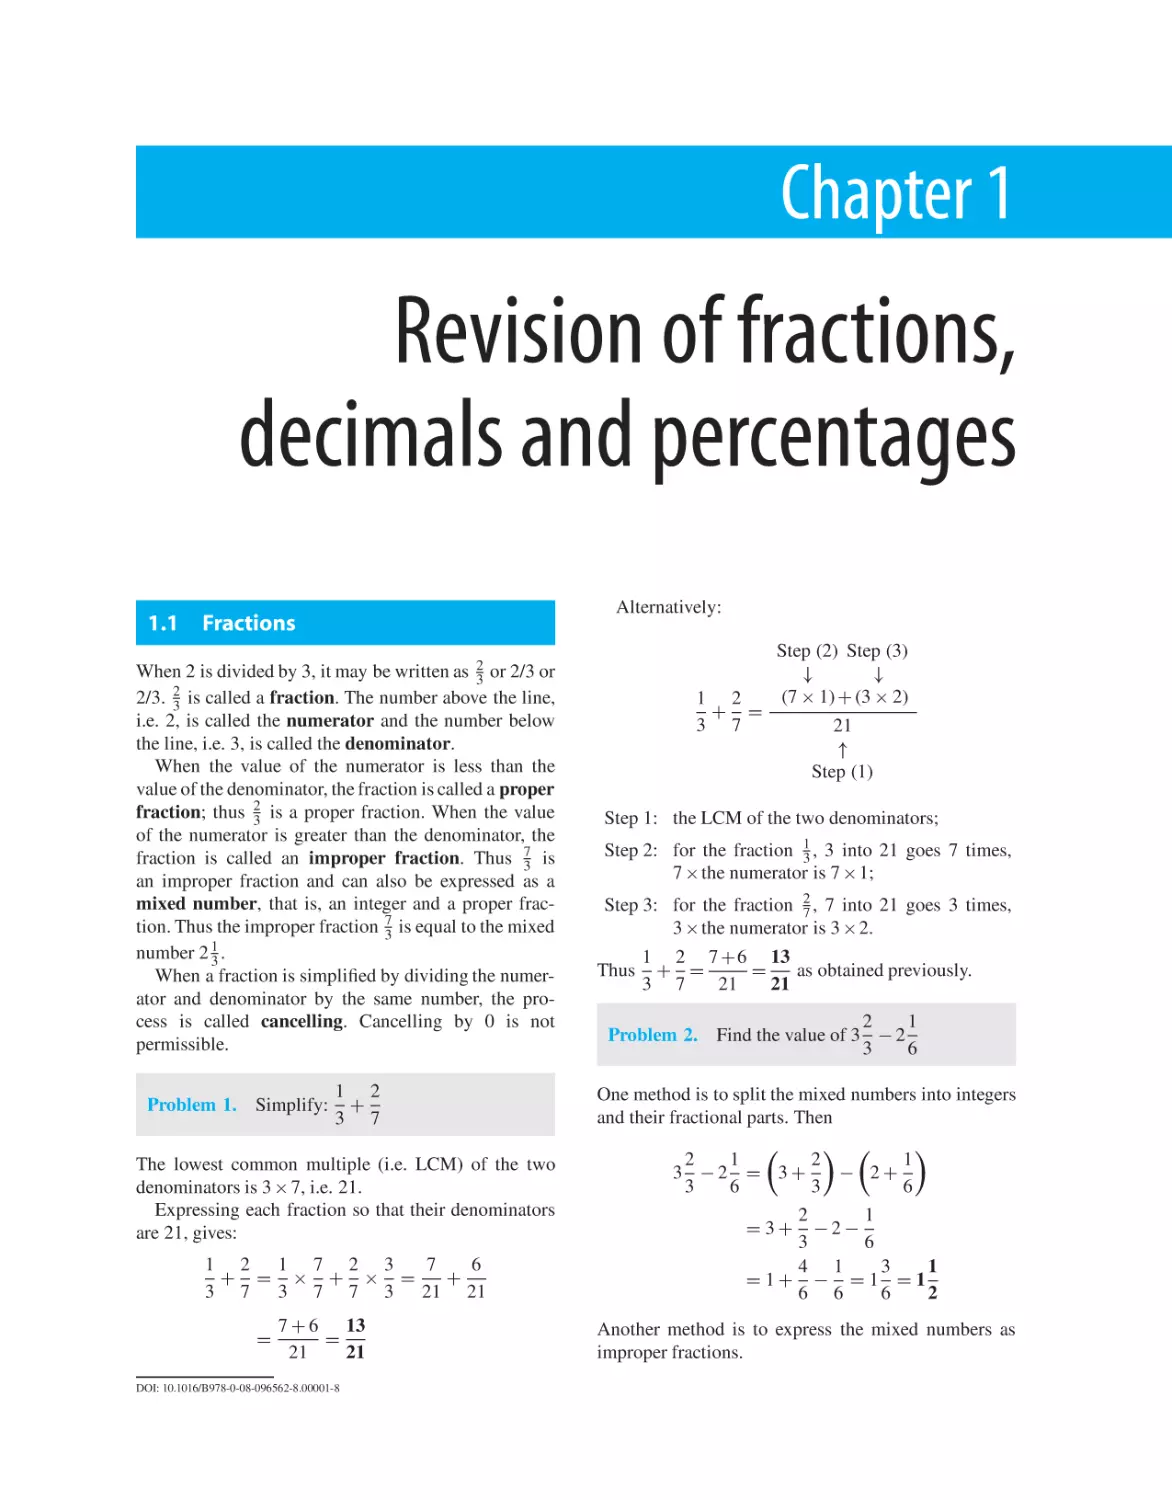 Chapter 1. Revision of fractions, decimals and percentages
1.1 Fractions